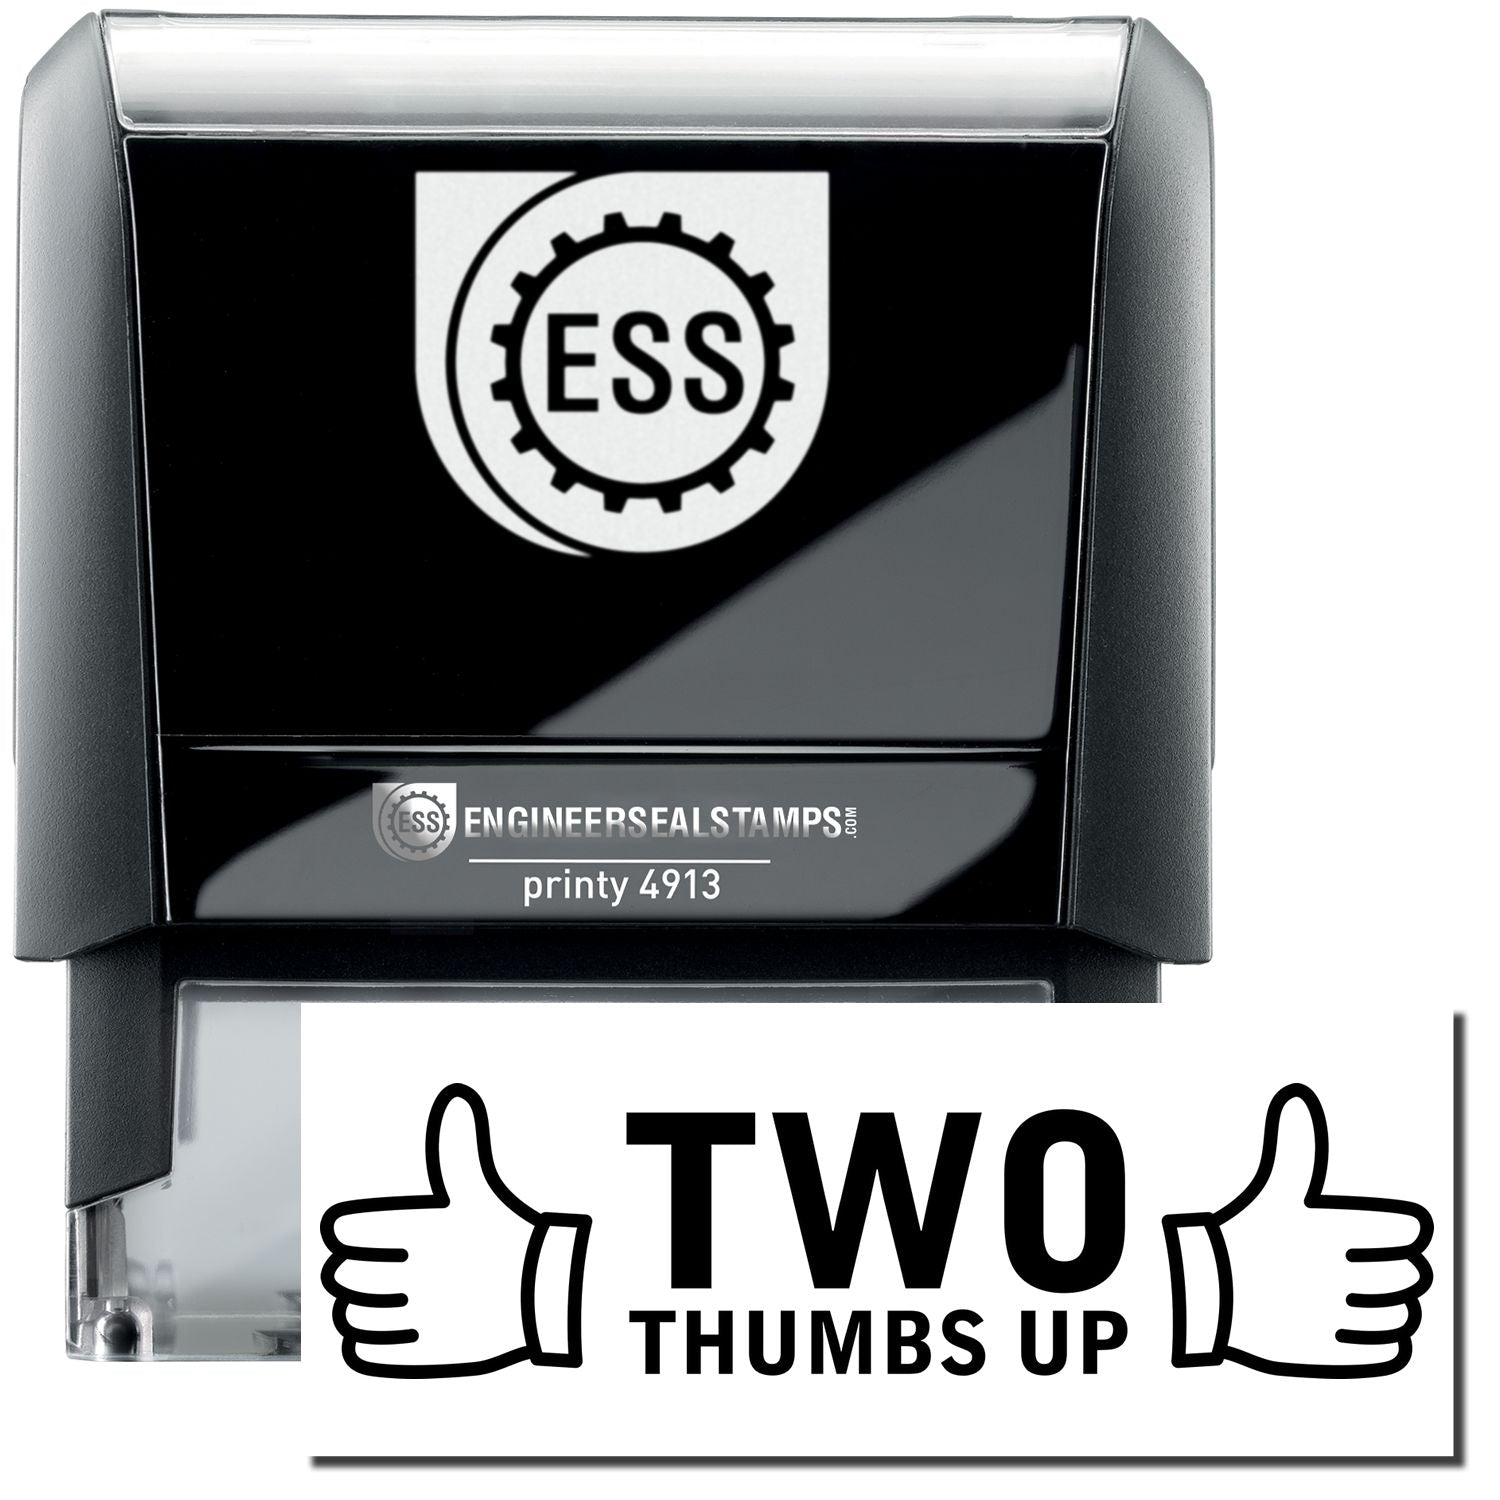 A self-inking stamp with a stamped image showing how the text "TWO THUMBS UP" in a large font with two thumbs pointing up on each side of the text is displayed after stamping.